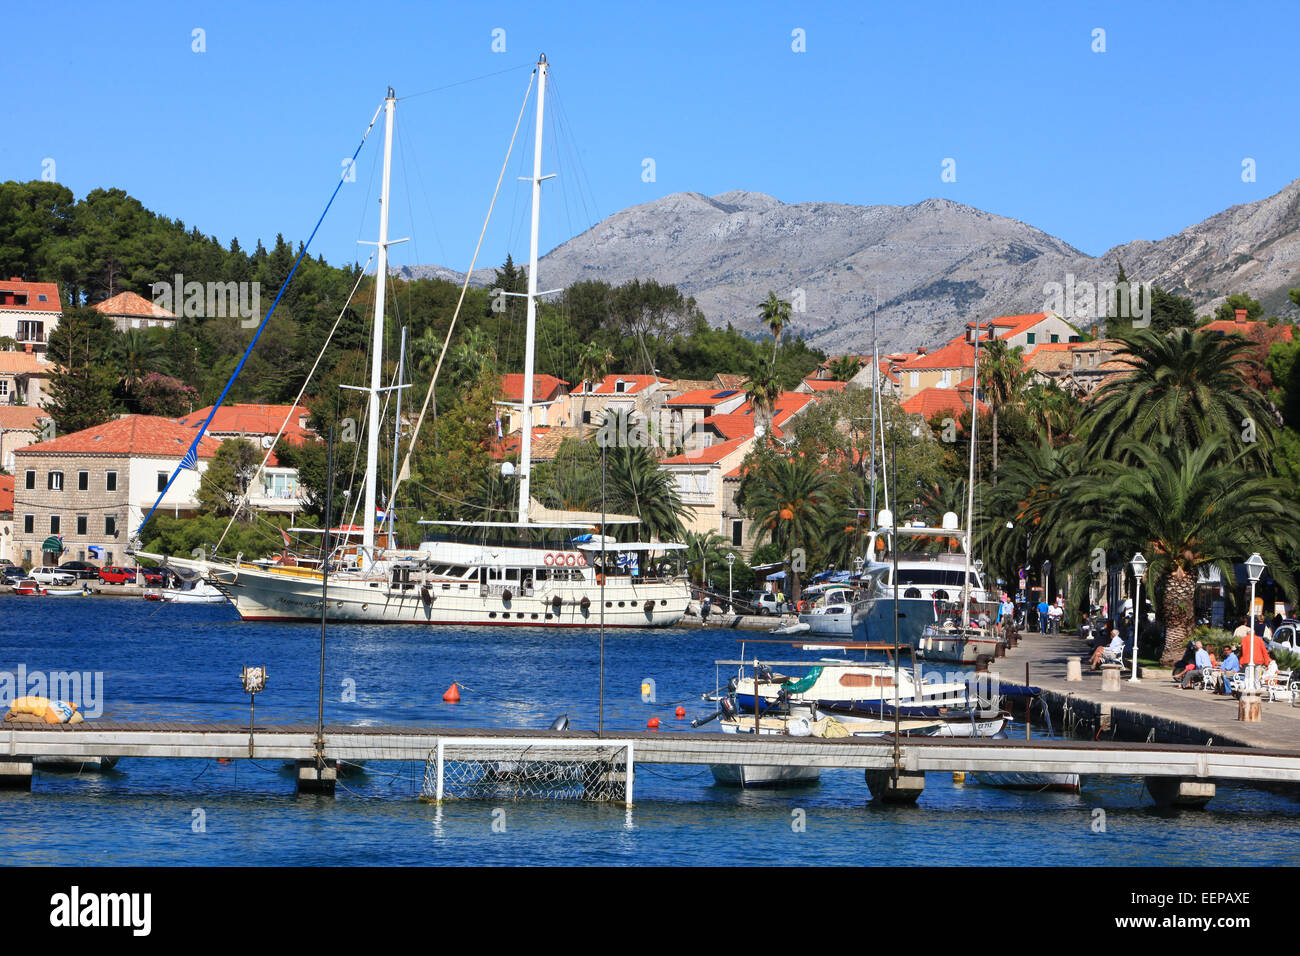 Cavtat, Harbour, Croatia with boats in harbour and Yachts on the Adreatic Sea; Central Europe and the Mediterranean. Stock Photo